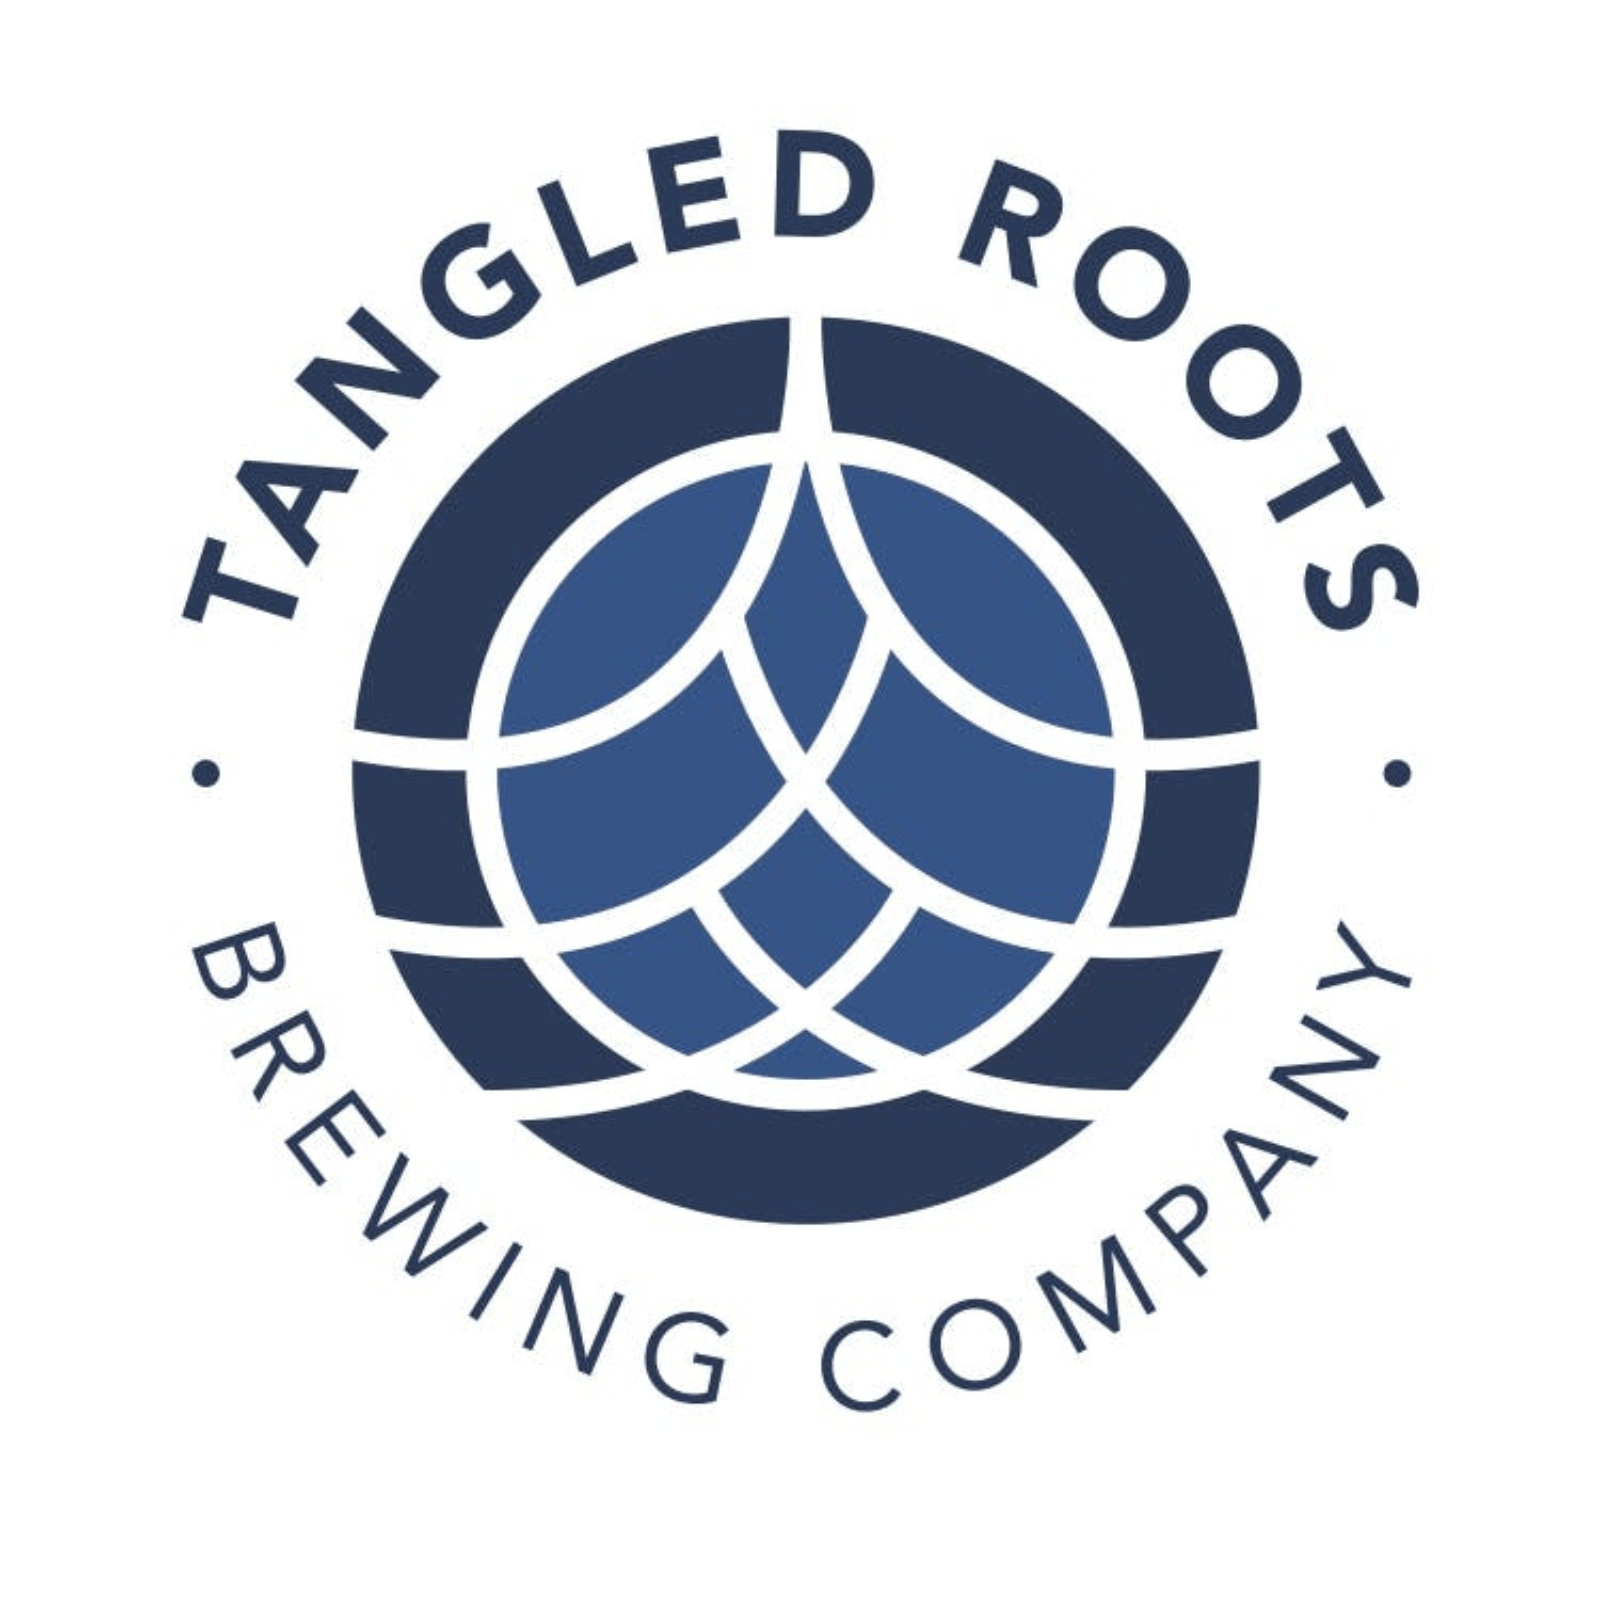 Tangled Roots Brewing